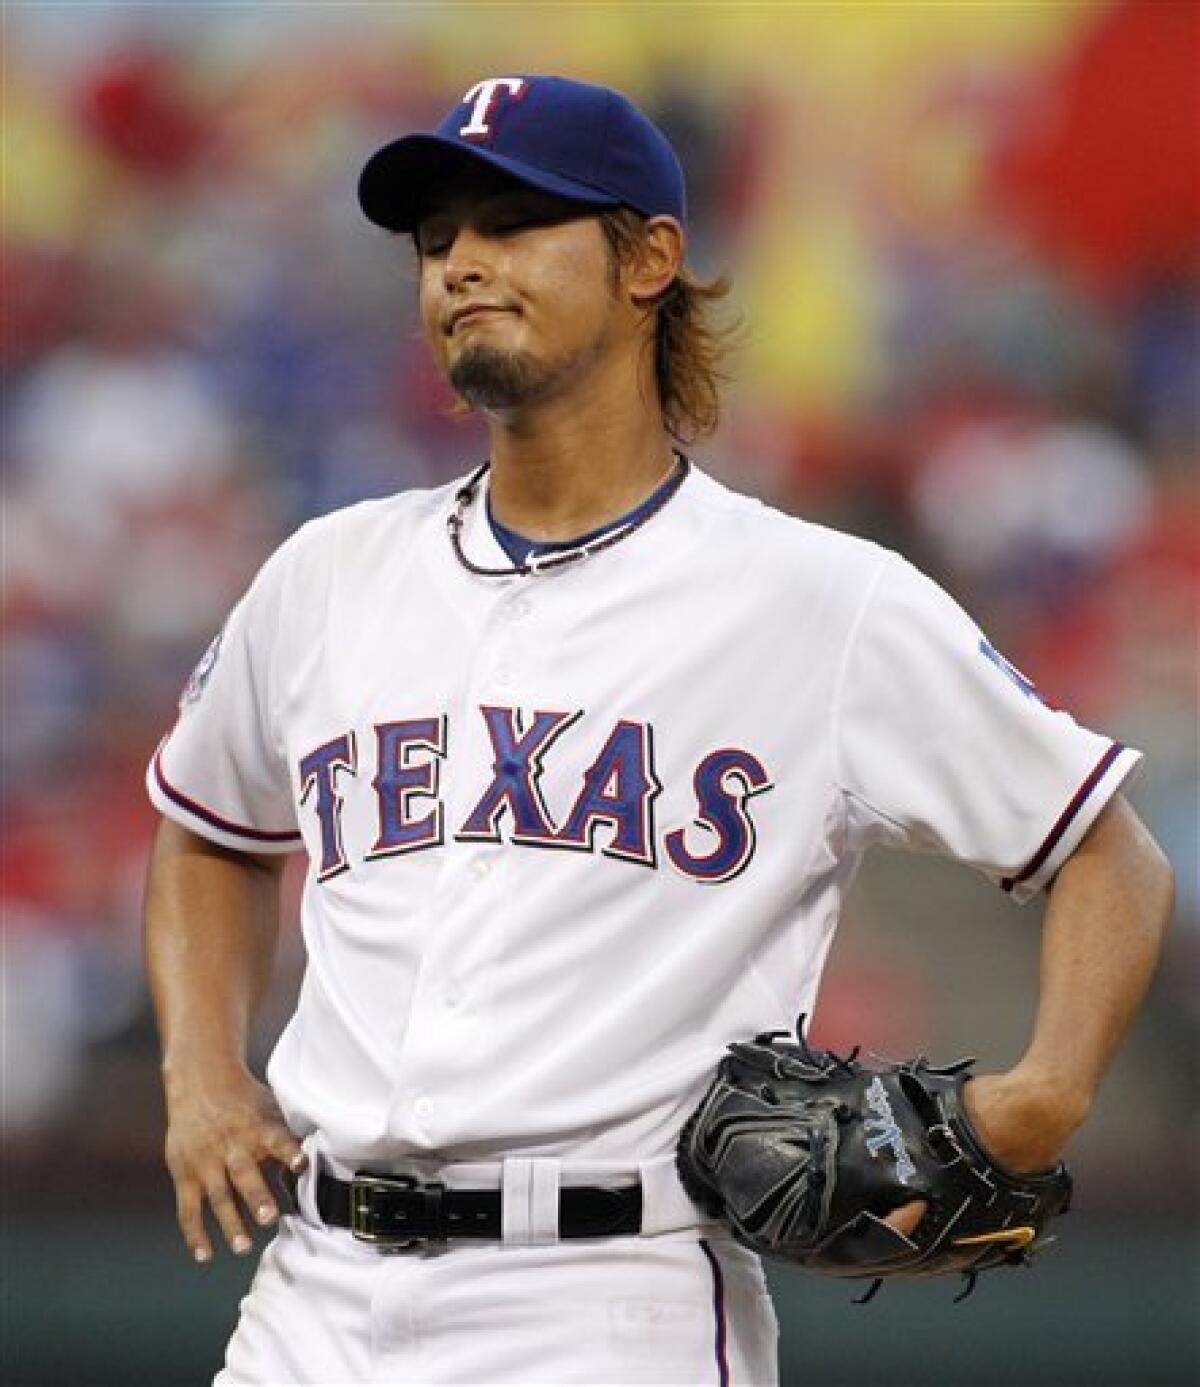 The Rangers newest addition to their pitching staff, Yu Darvish